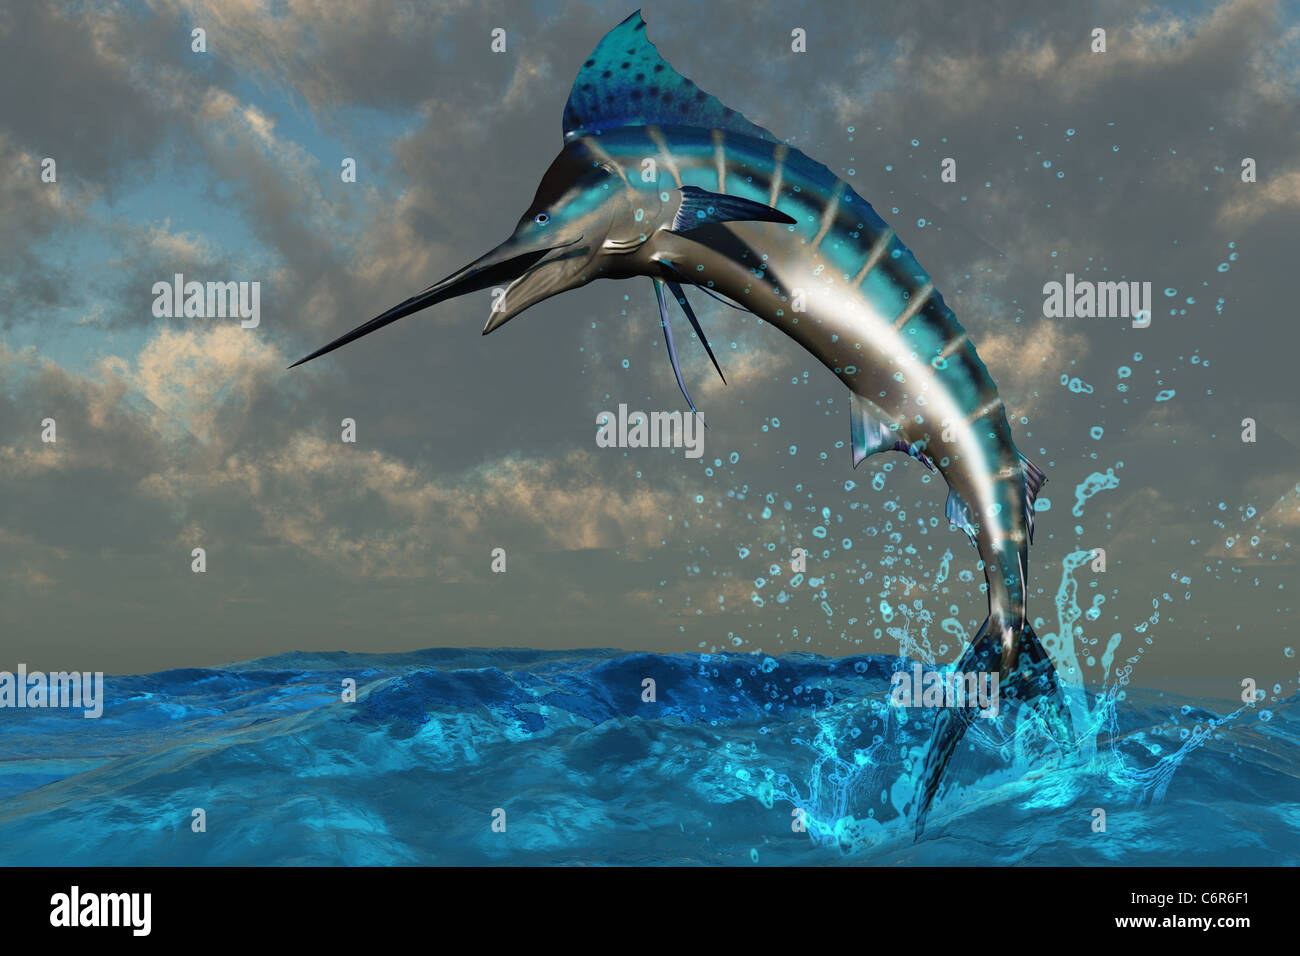 A spectacular Blue Marlin flashes its iridescent colors as it bursts from the ocean. Stock Photo